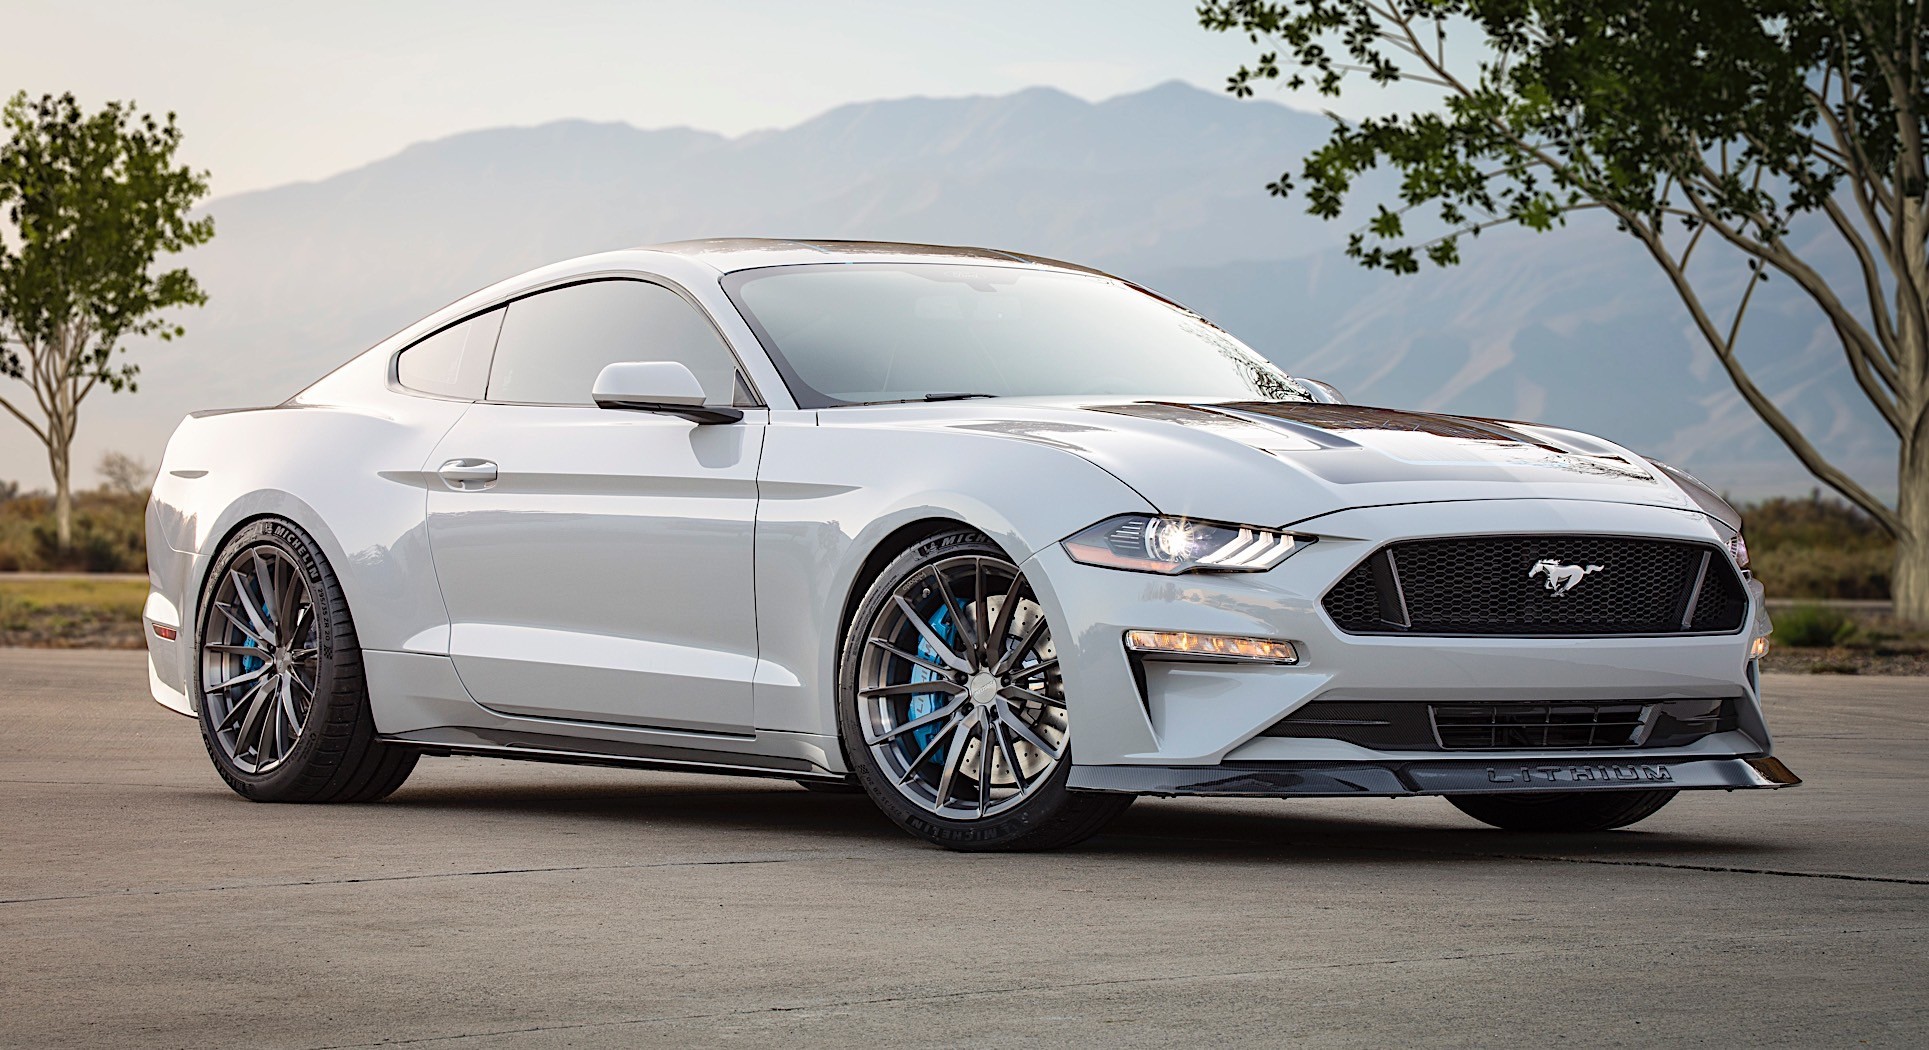 Ford Mustang GT-e Design Study Reimagines the Pony Car With Electric